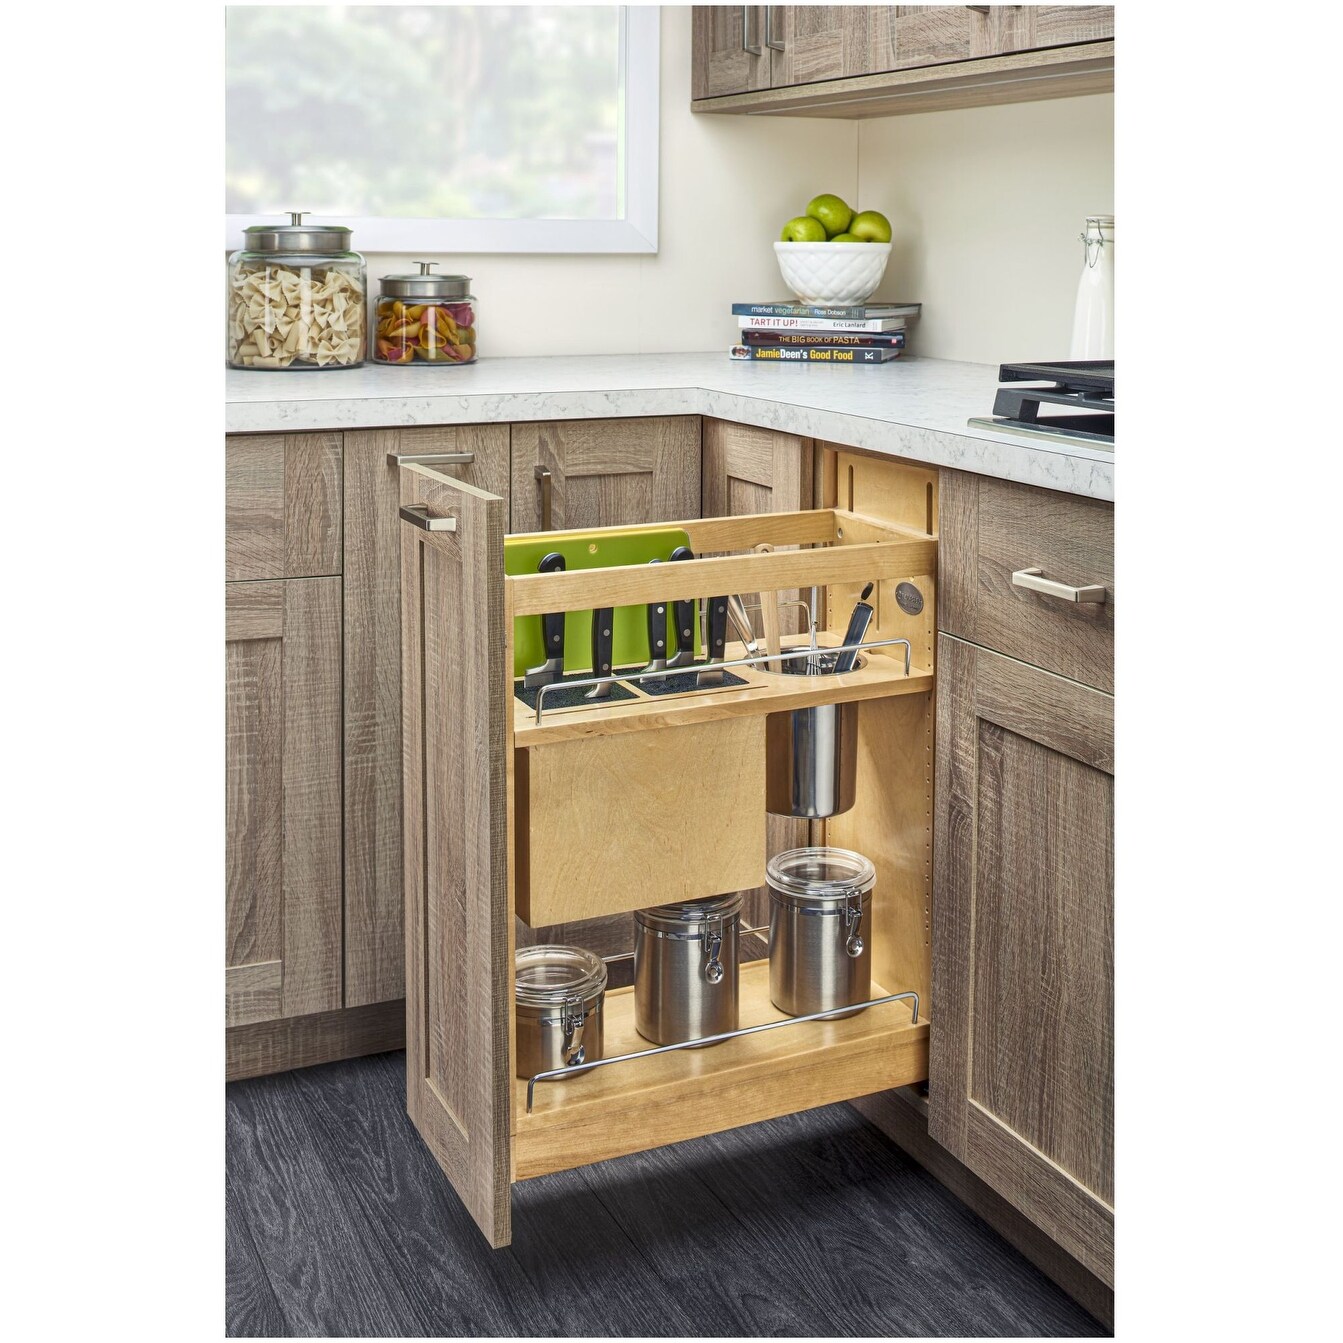 Rev-A-Shelf 10-1/4 Inch Pull Out Cabinet Organizer with Knife Block,